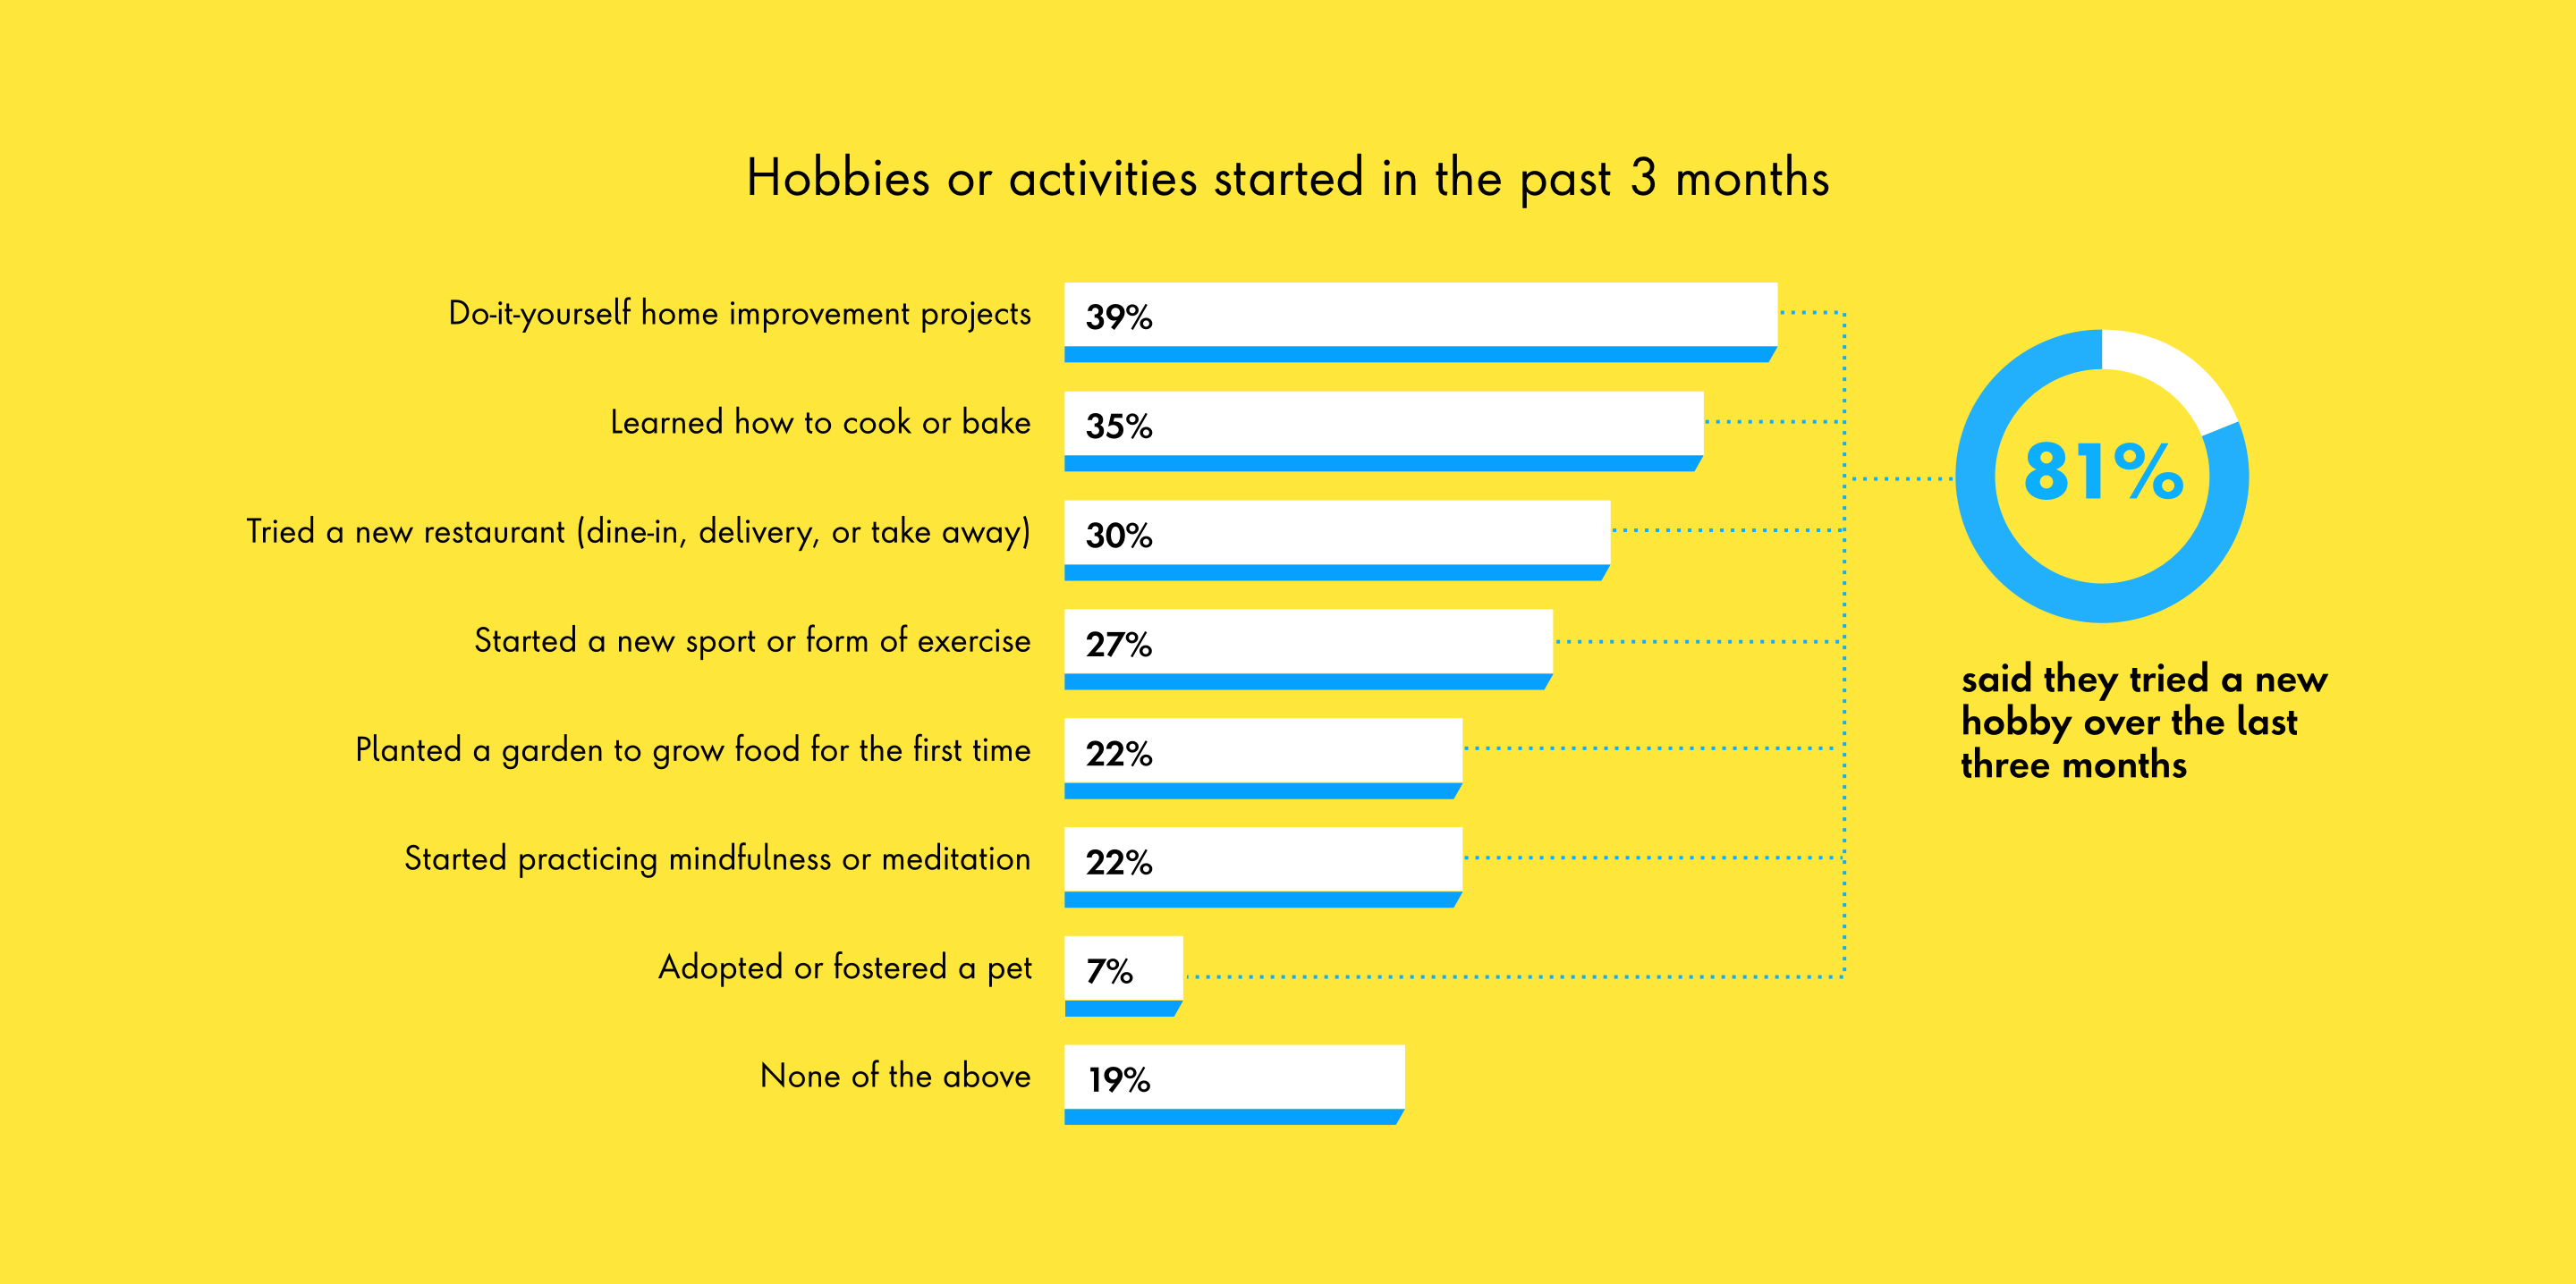 Chart: 81% said they tried a new hobbie over the last 3 months